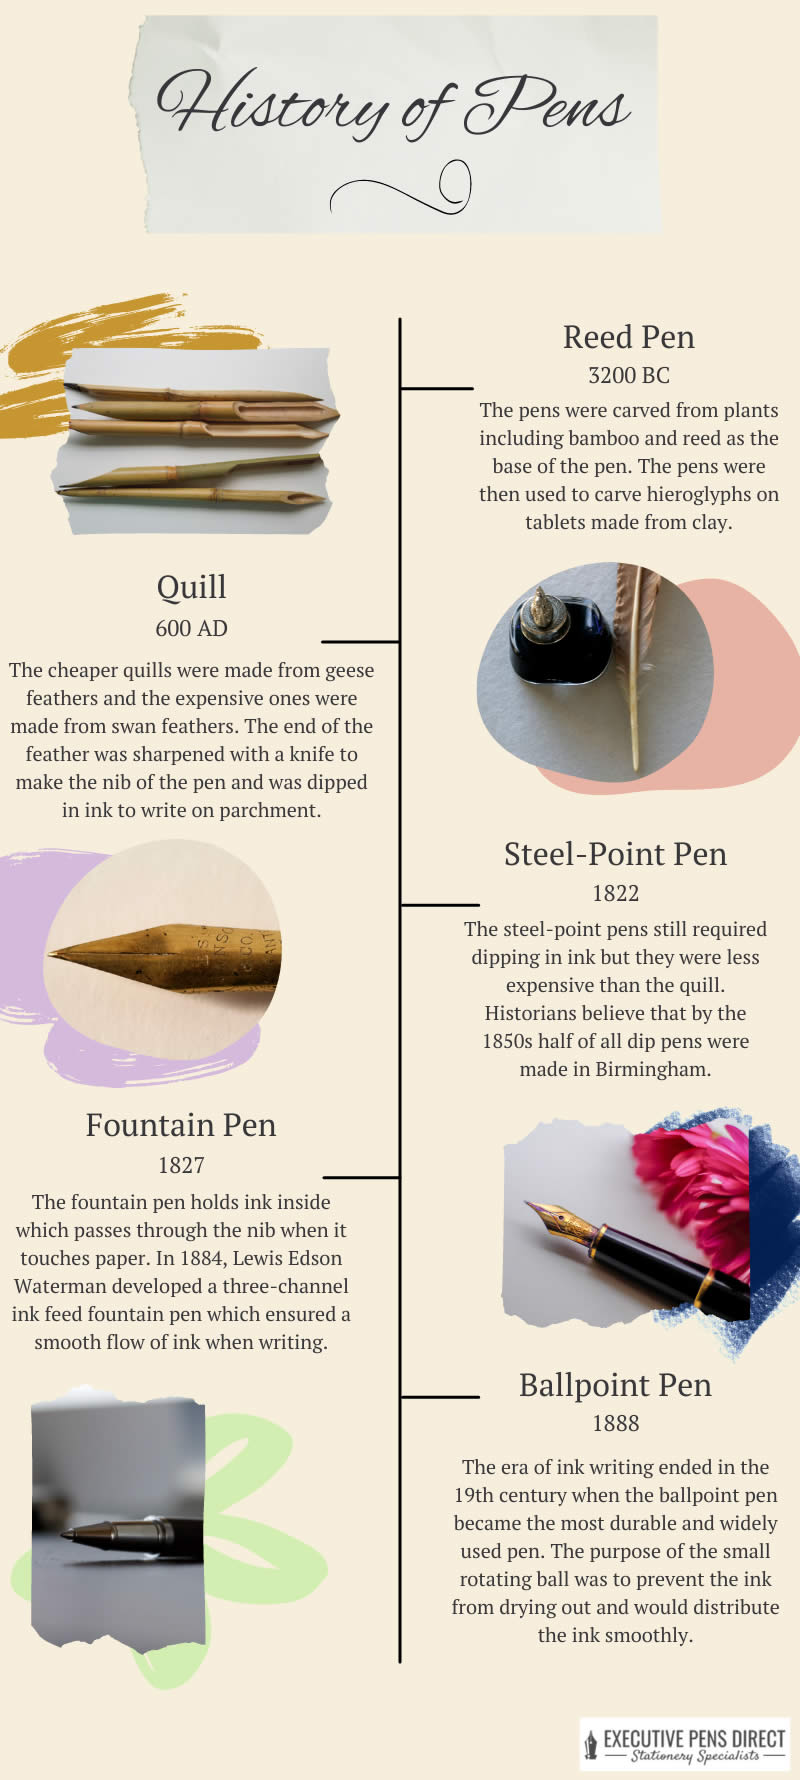 Timeline of the pen